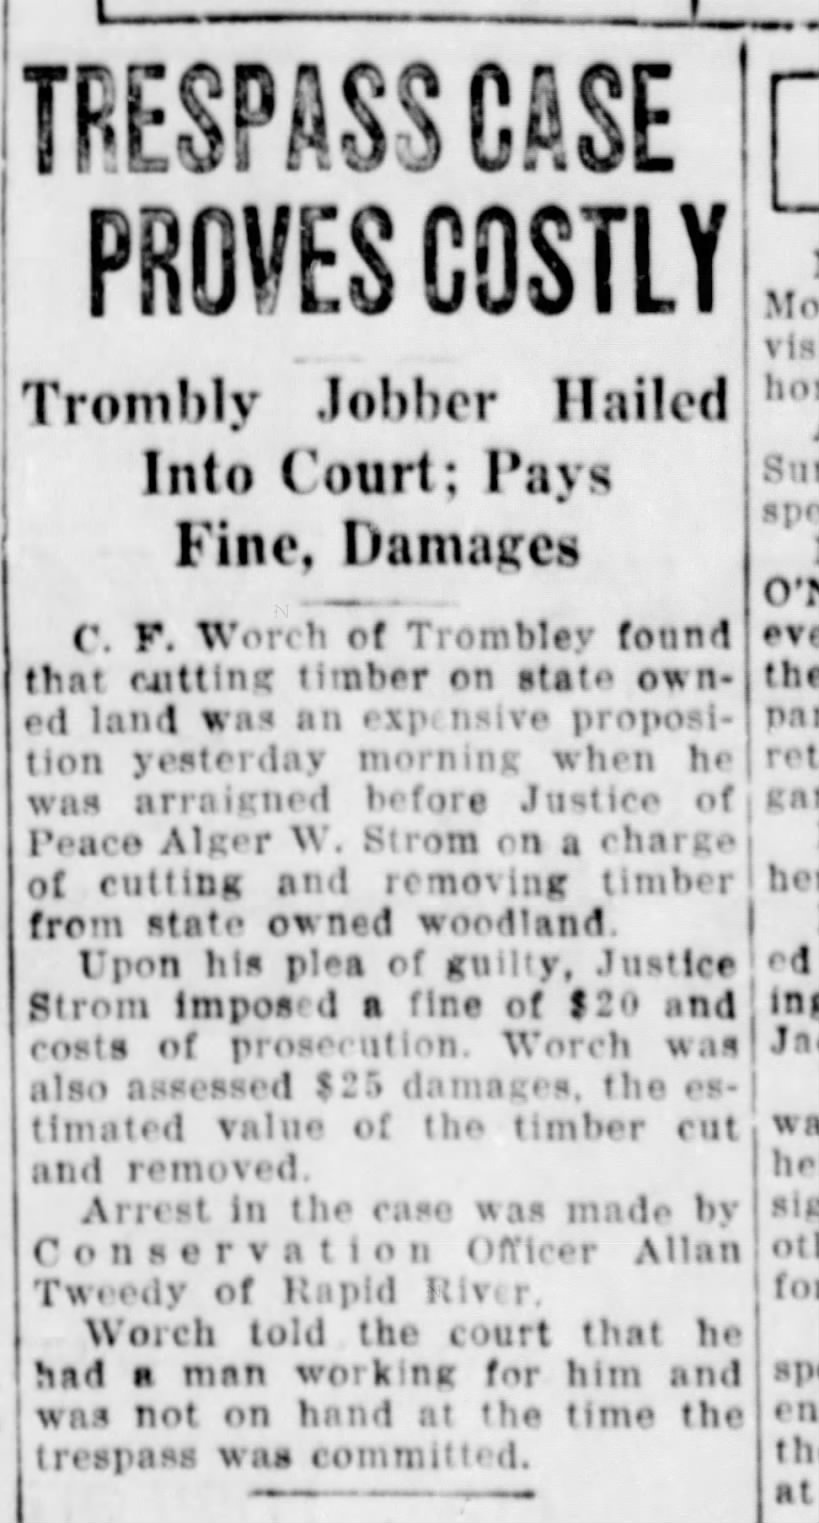 chris worch trespassing state land escanaba daily news 30 sept 1942